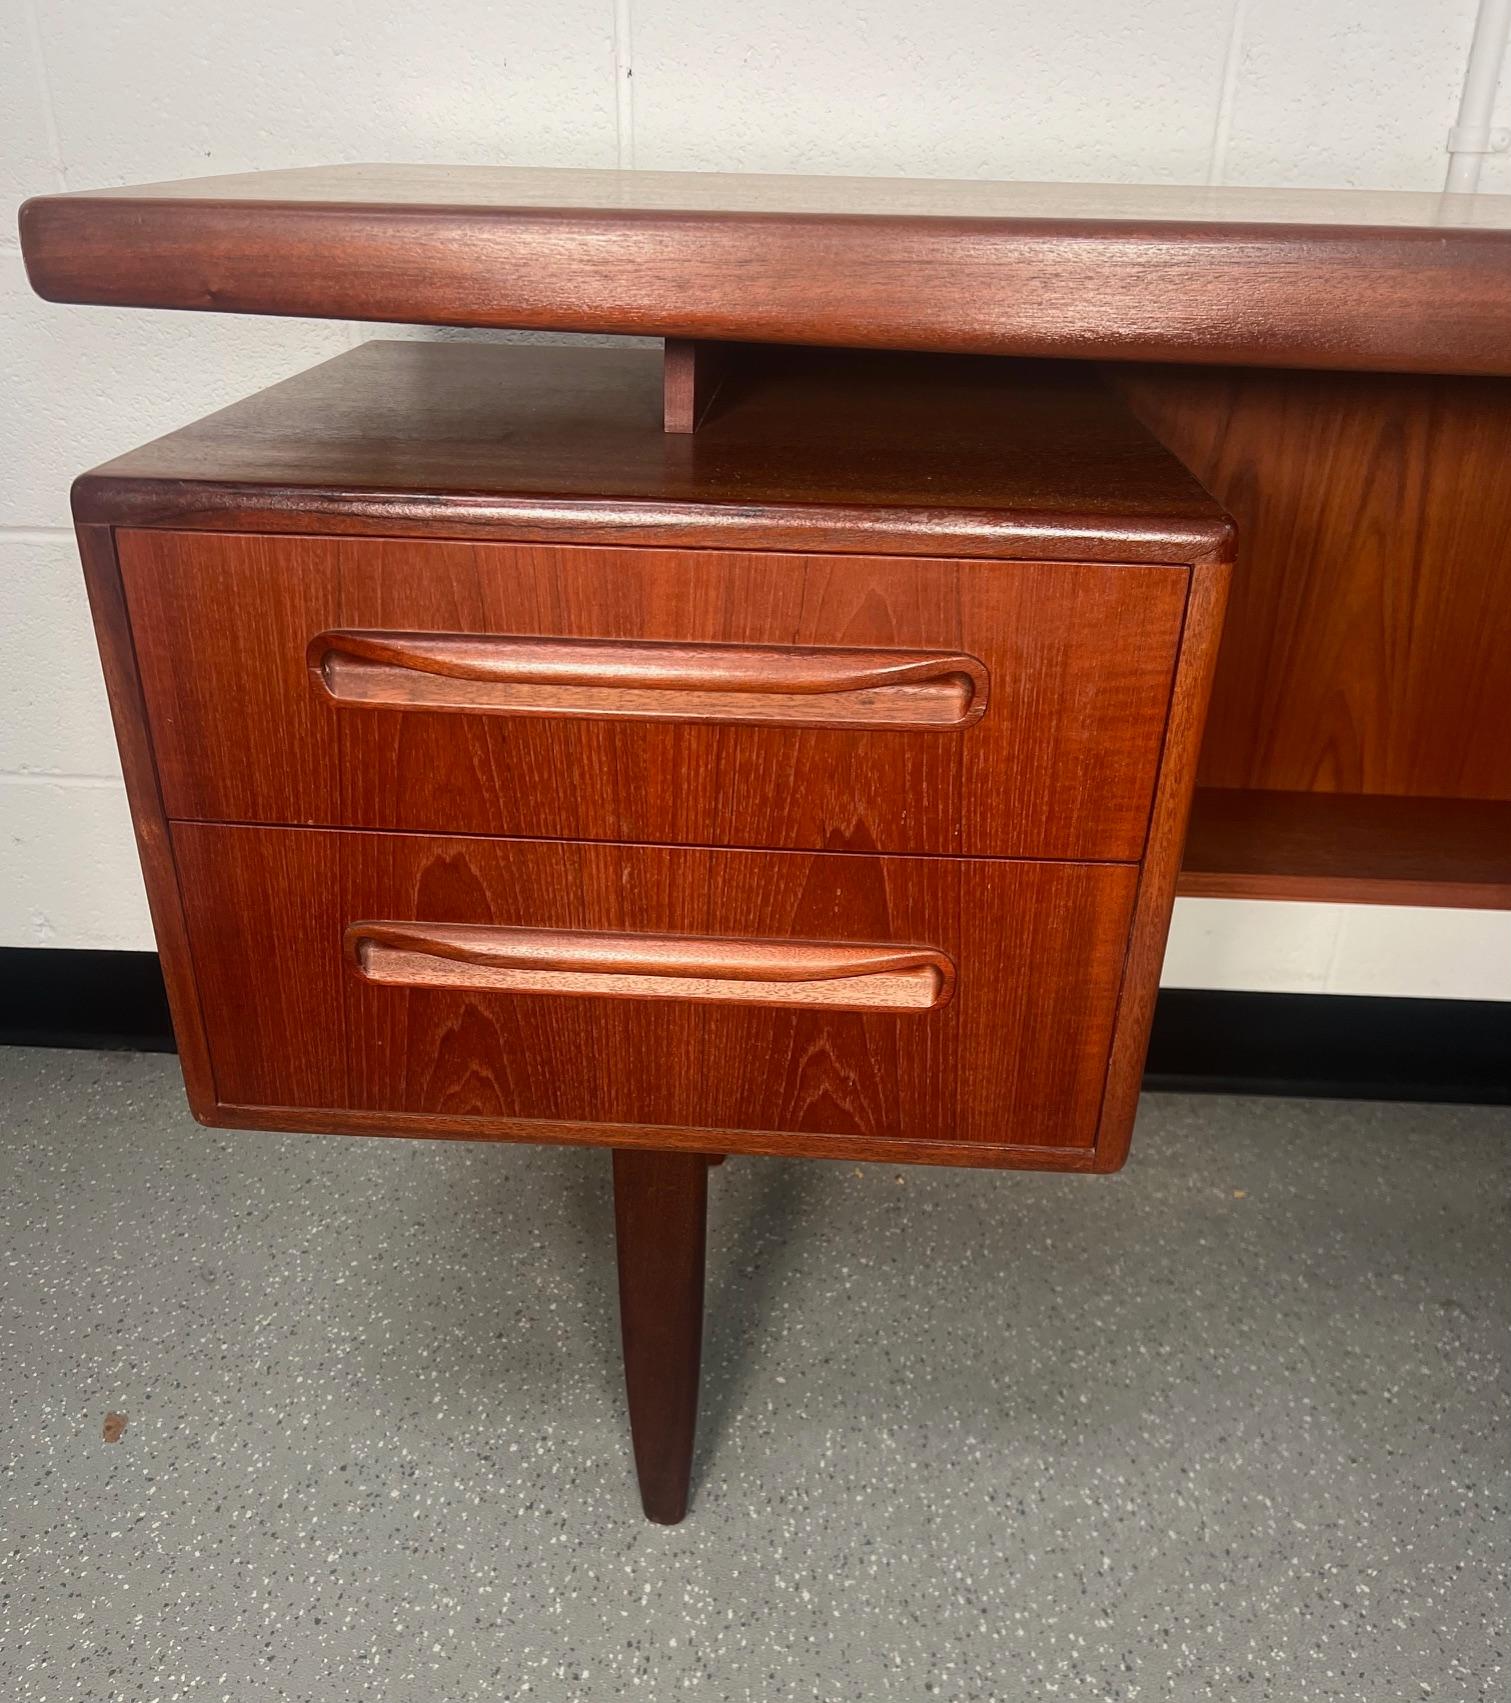 Fantastic mid-century teak vanity or desk.
Designed in the 60s by Victor Bramwell Wilkins for G Plan's Fresco Range. Danish Modern in style. Small removable tray in left top drawer. This is the version that does not have a secret middle drawer.